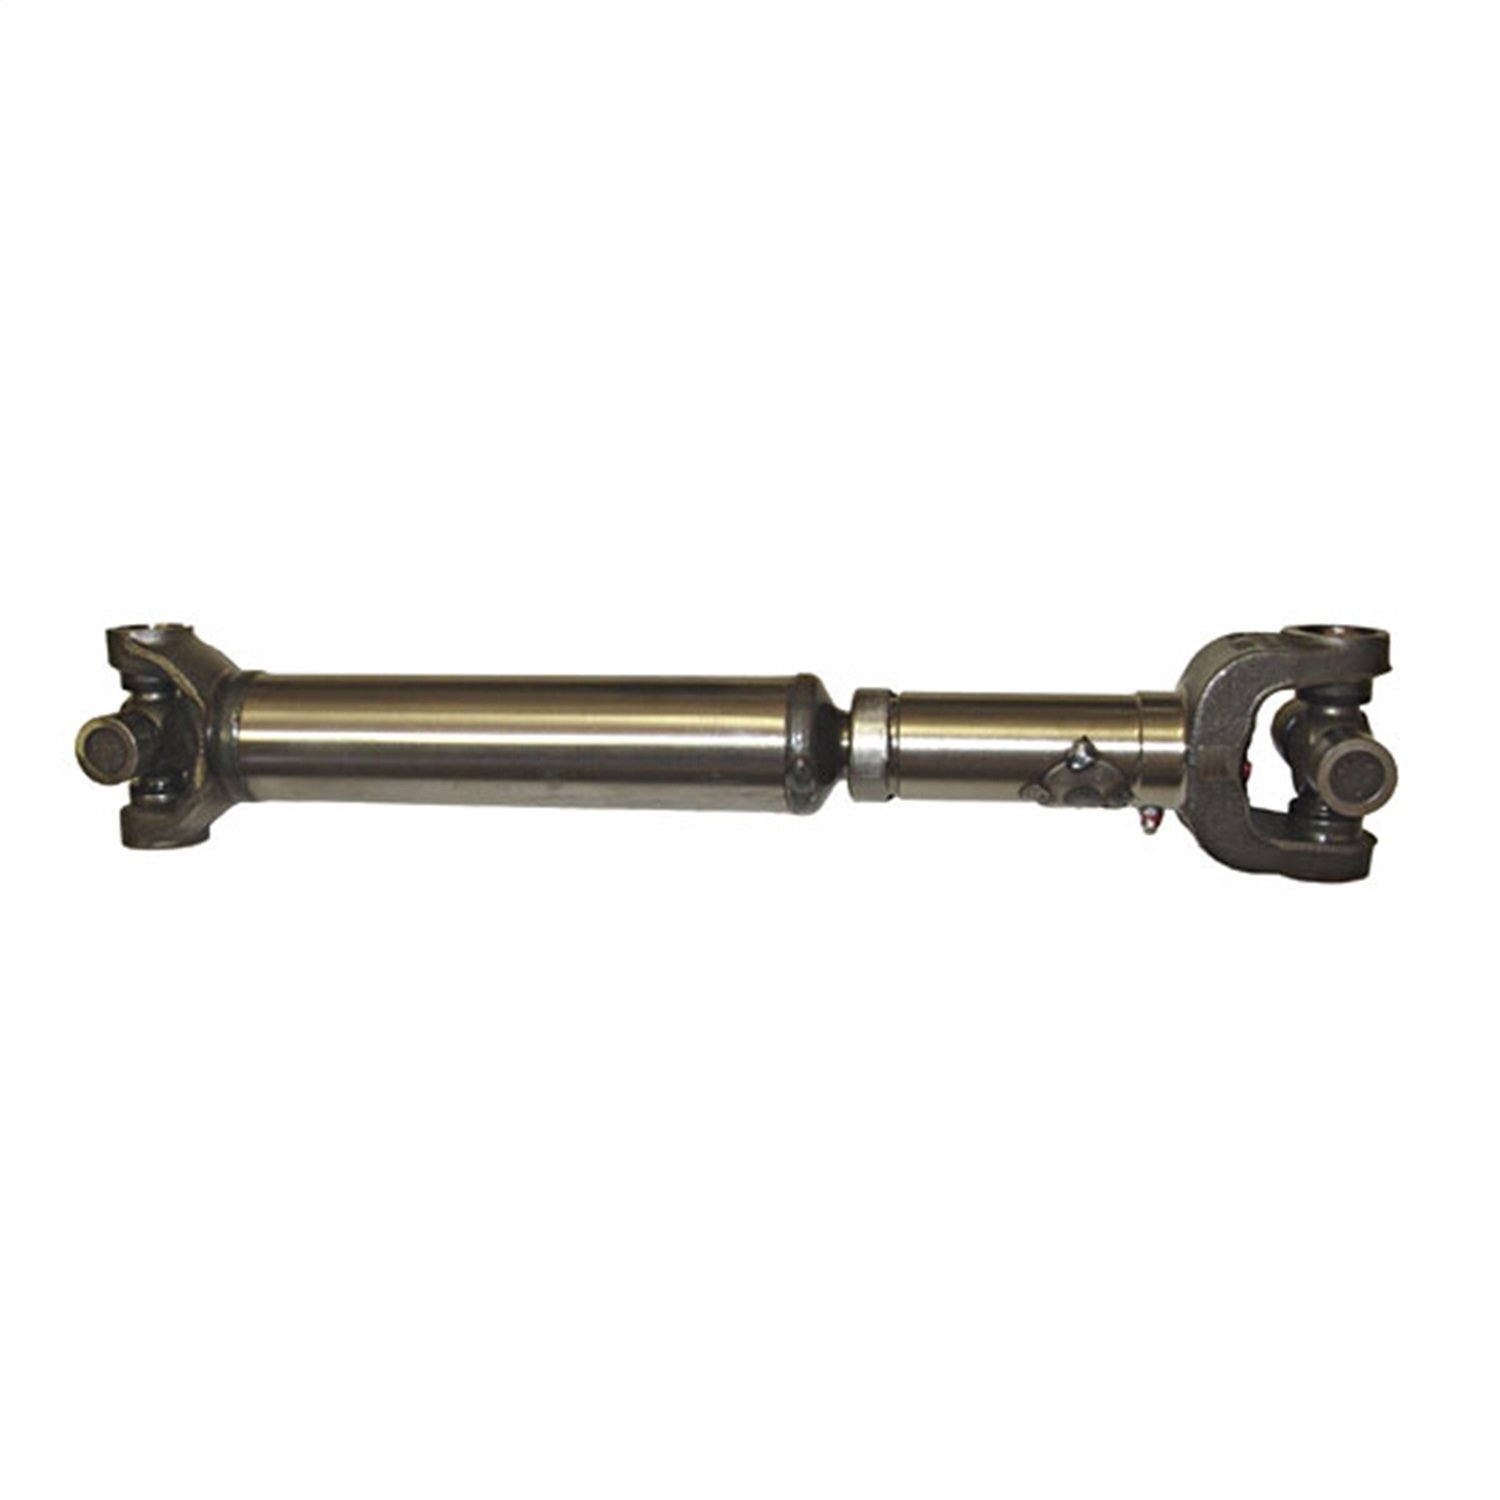 FRONT DRIVESHAFT 32IN 82-